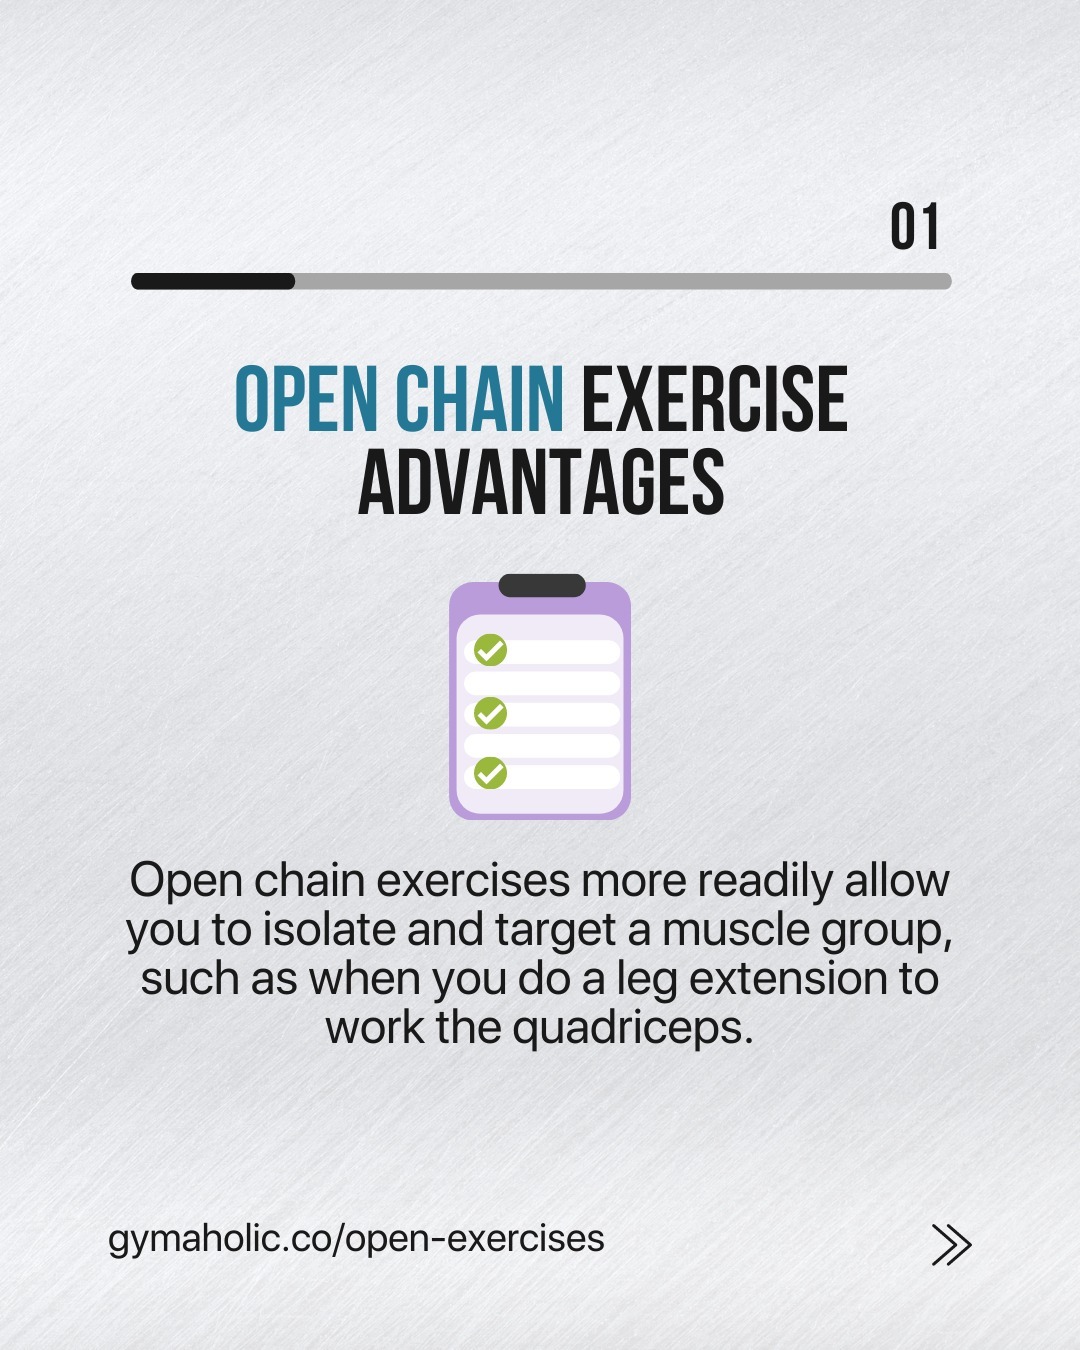 Open vs. Closed Chain Exercises